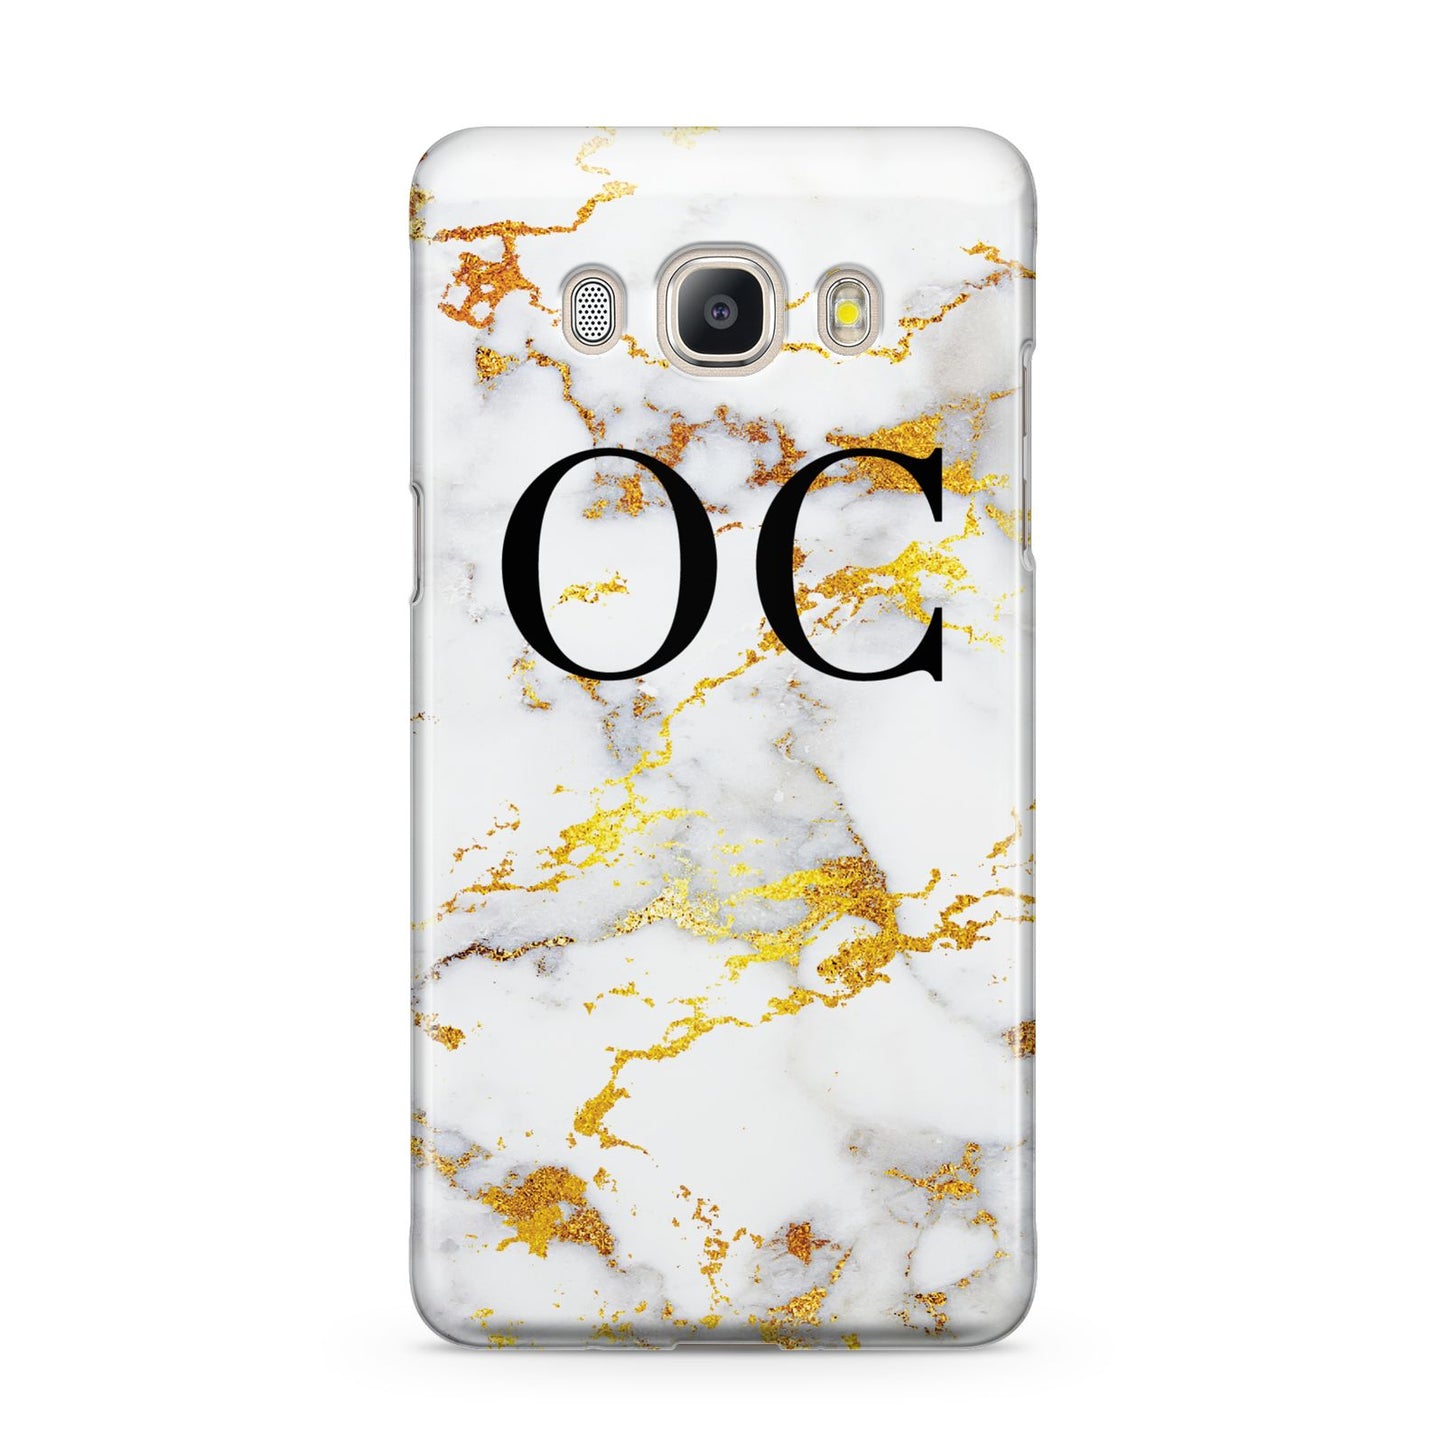 Personalised Gold Marble Initials Monogram Samsung Galaxy J5 2016 Case